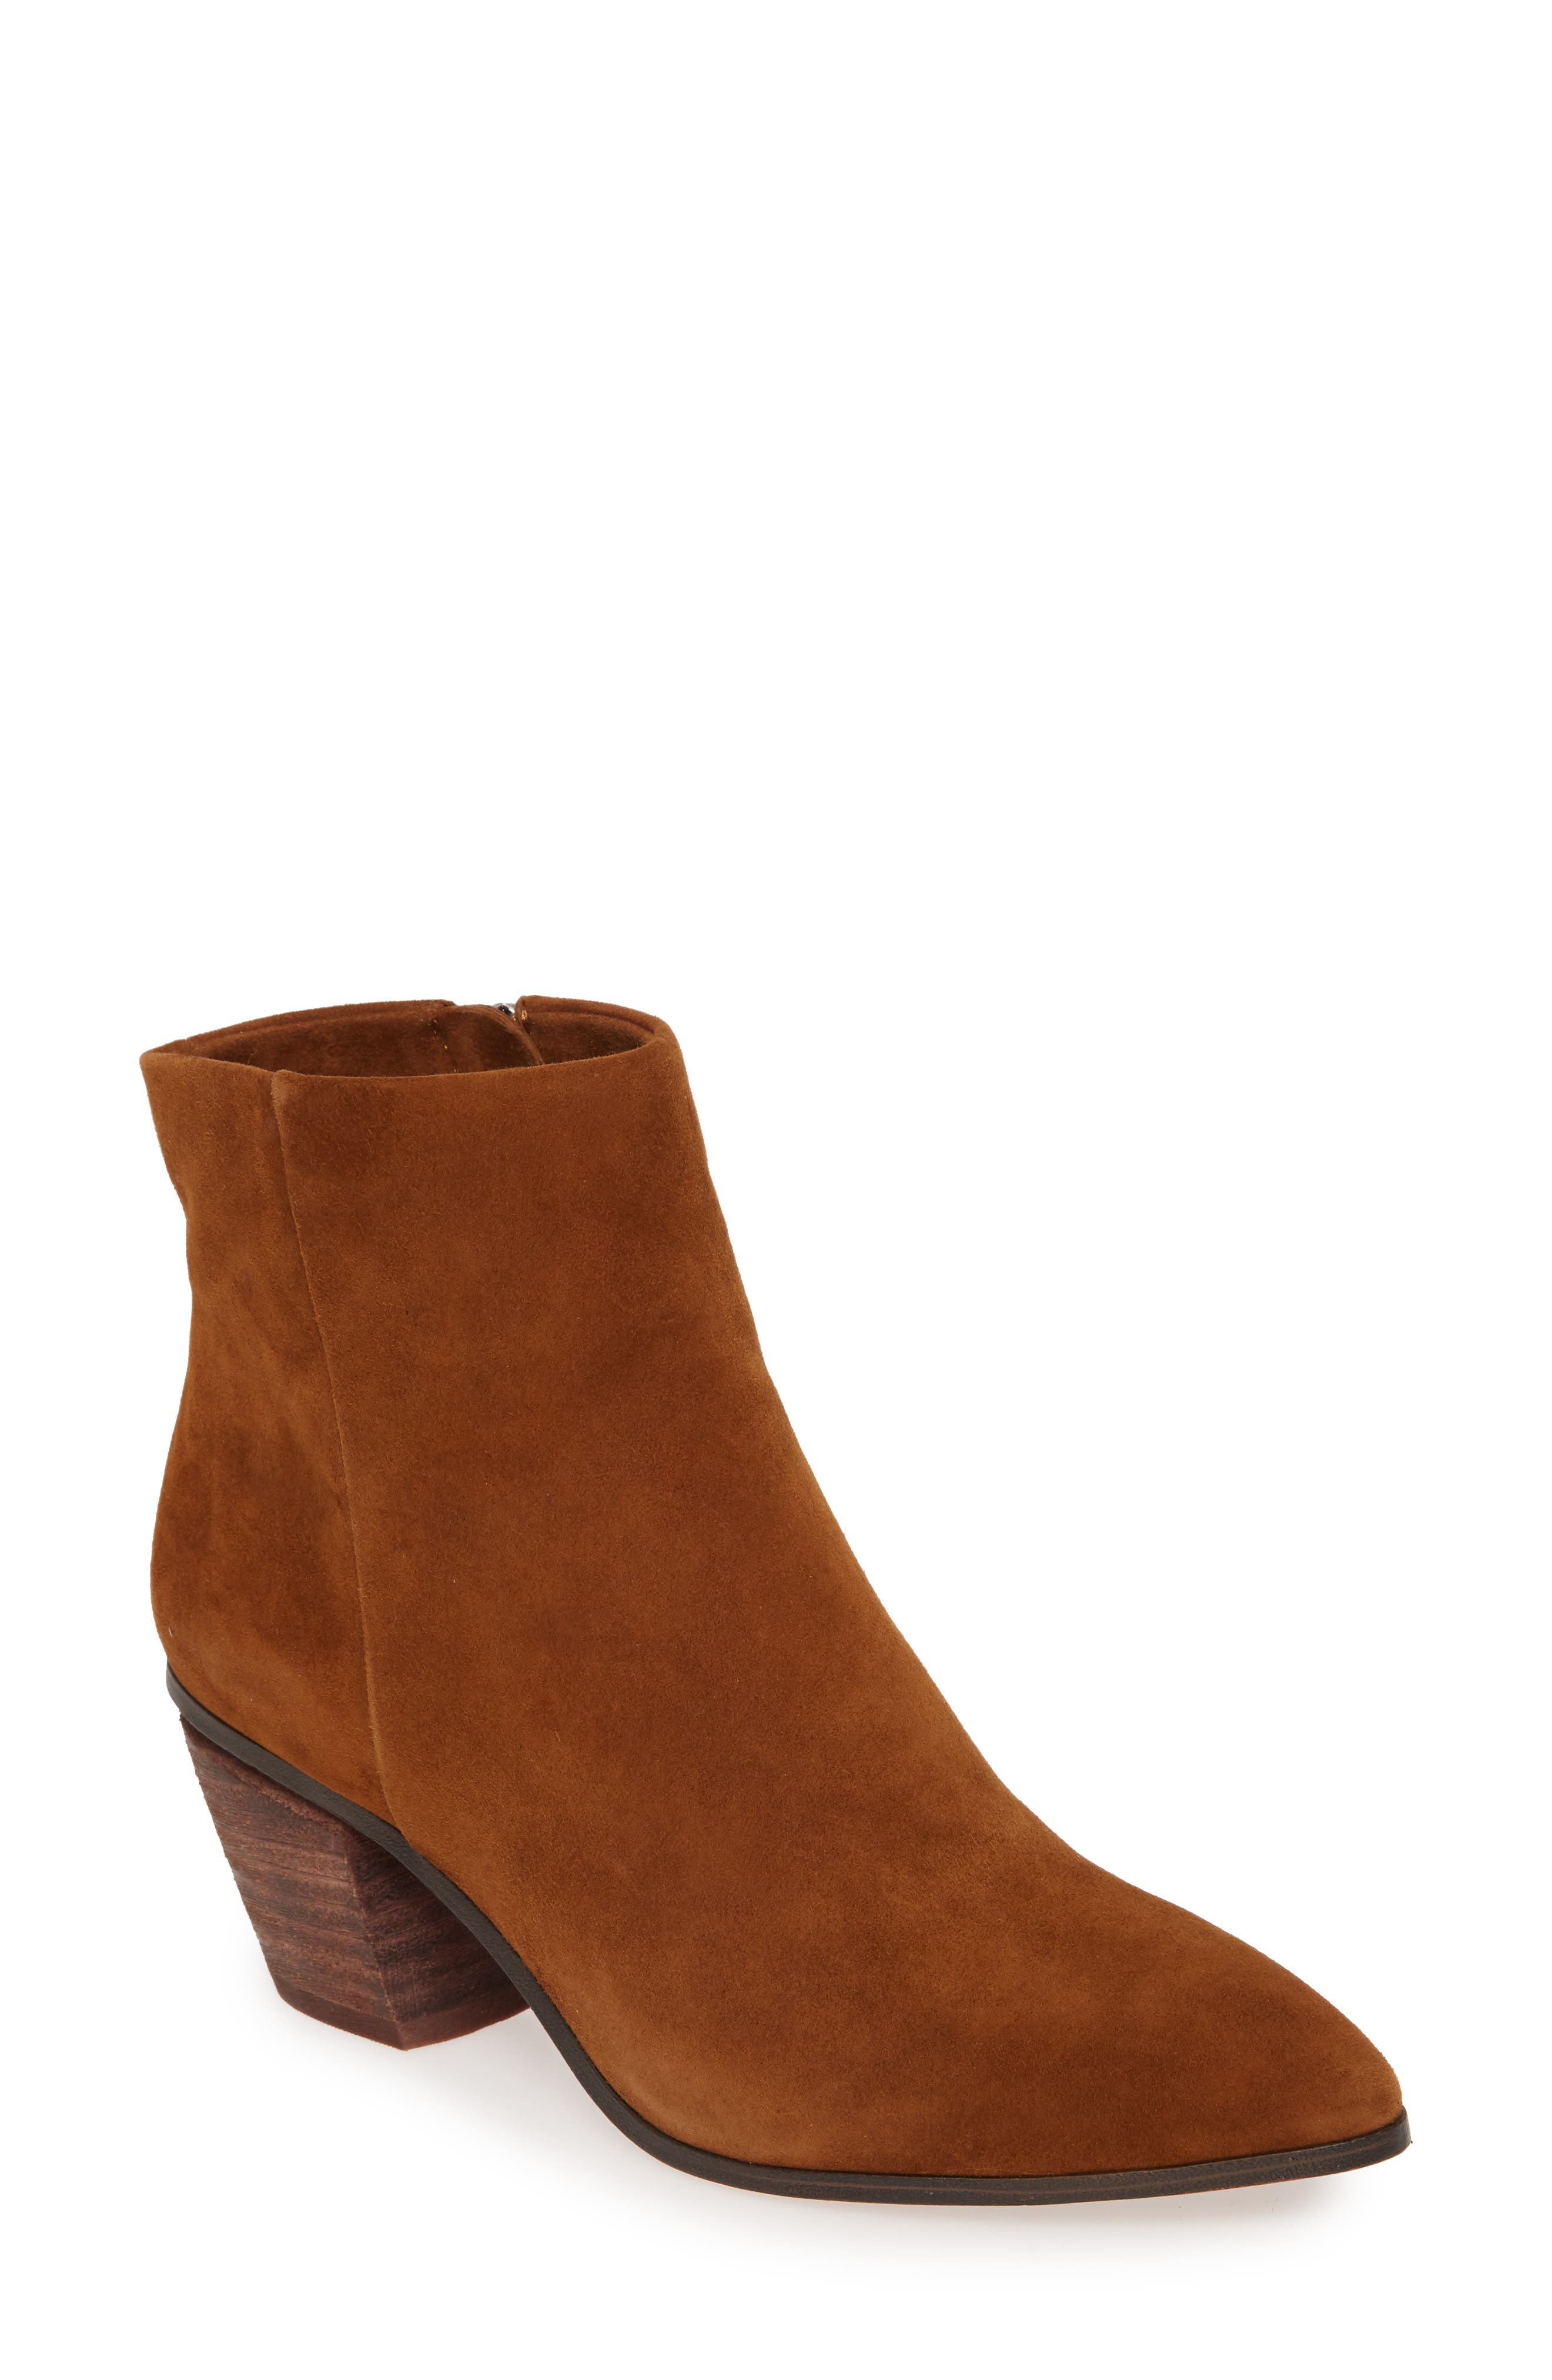 vince camuto payge boots